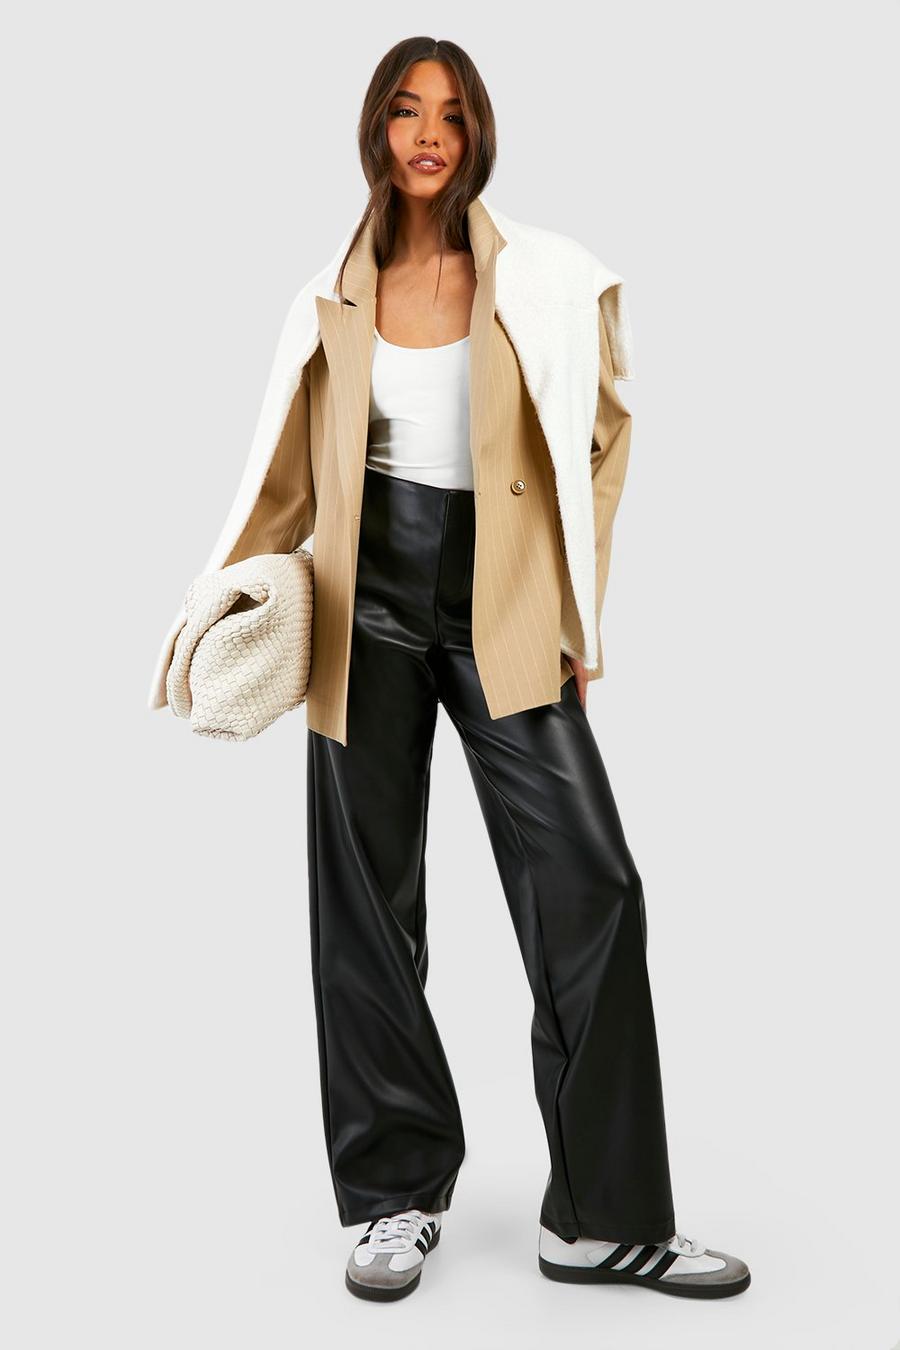 Low-rise flared faux leather pants in brown - Rotate